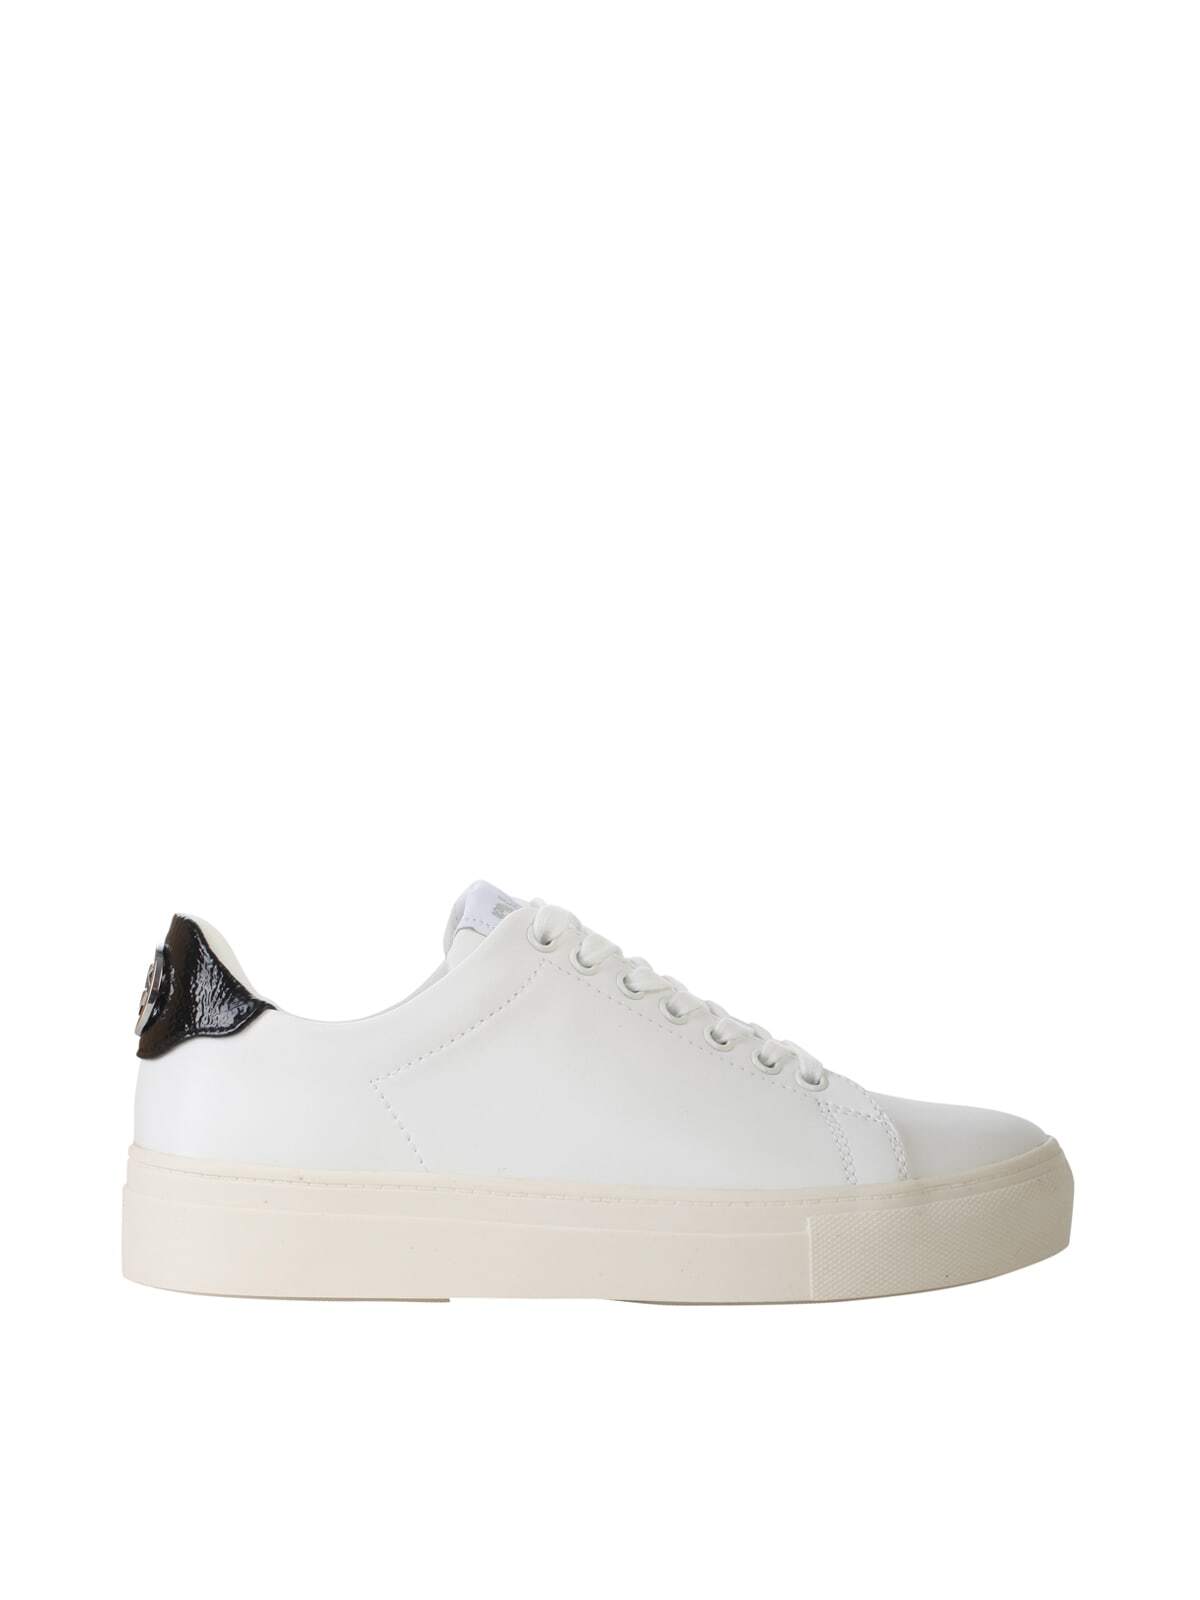 DKNY Tumbled Leather Grainy Patent Pu Chambers Lace Up Sneaker 35mm in black / white